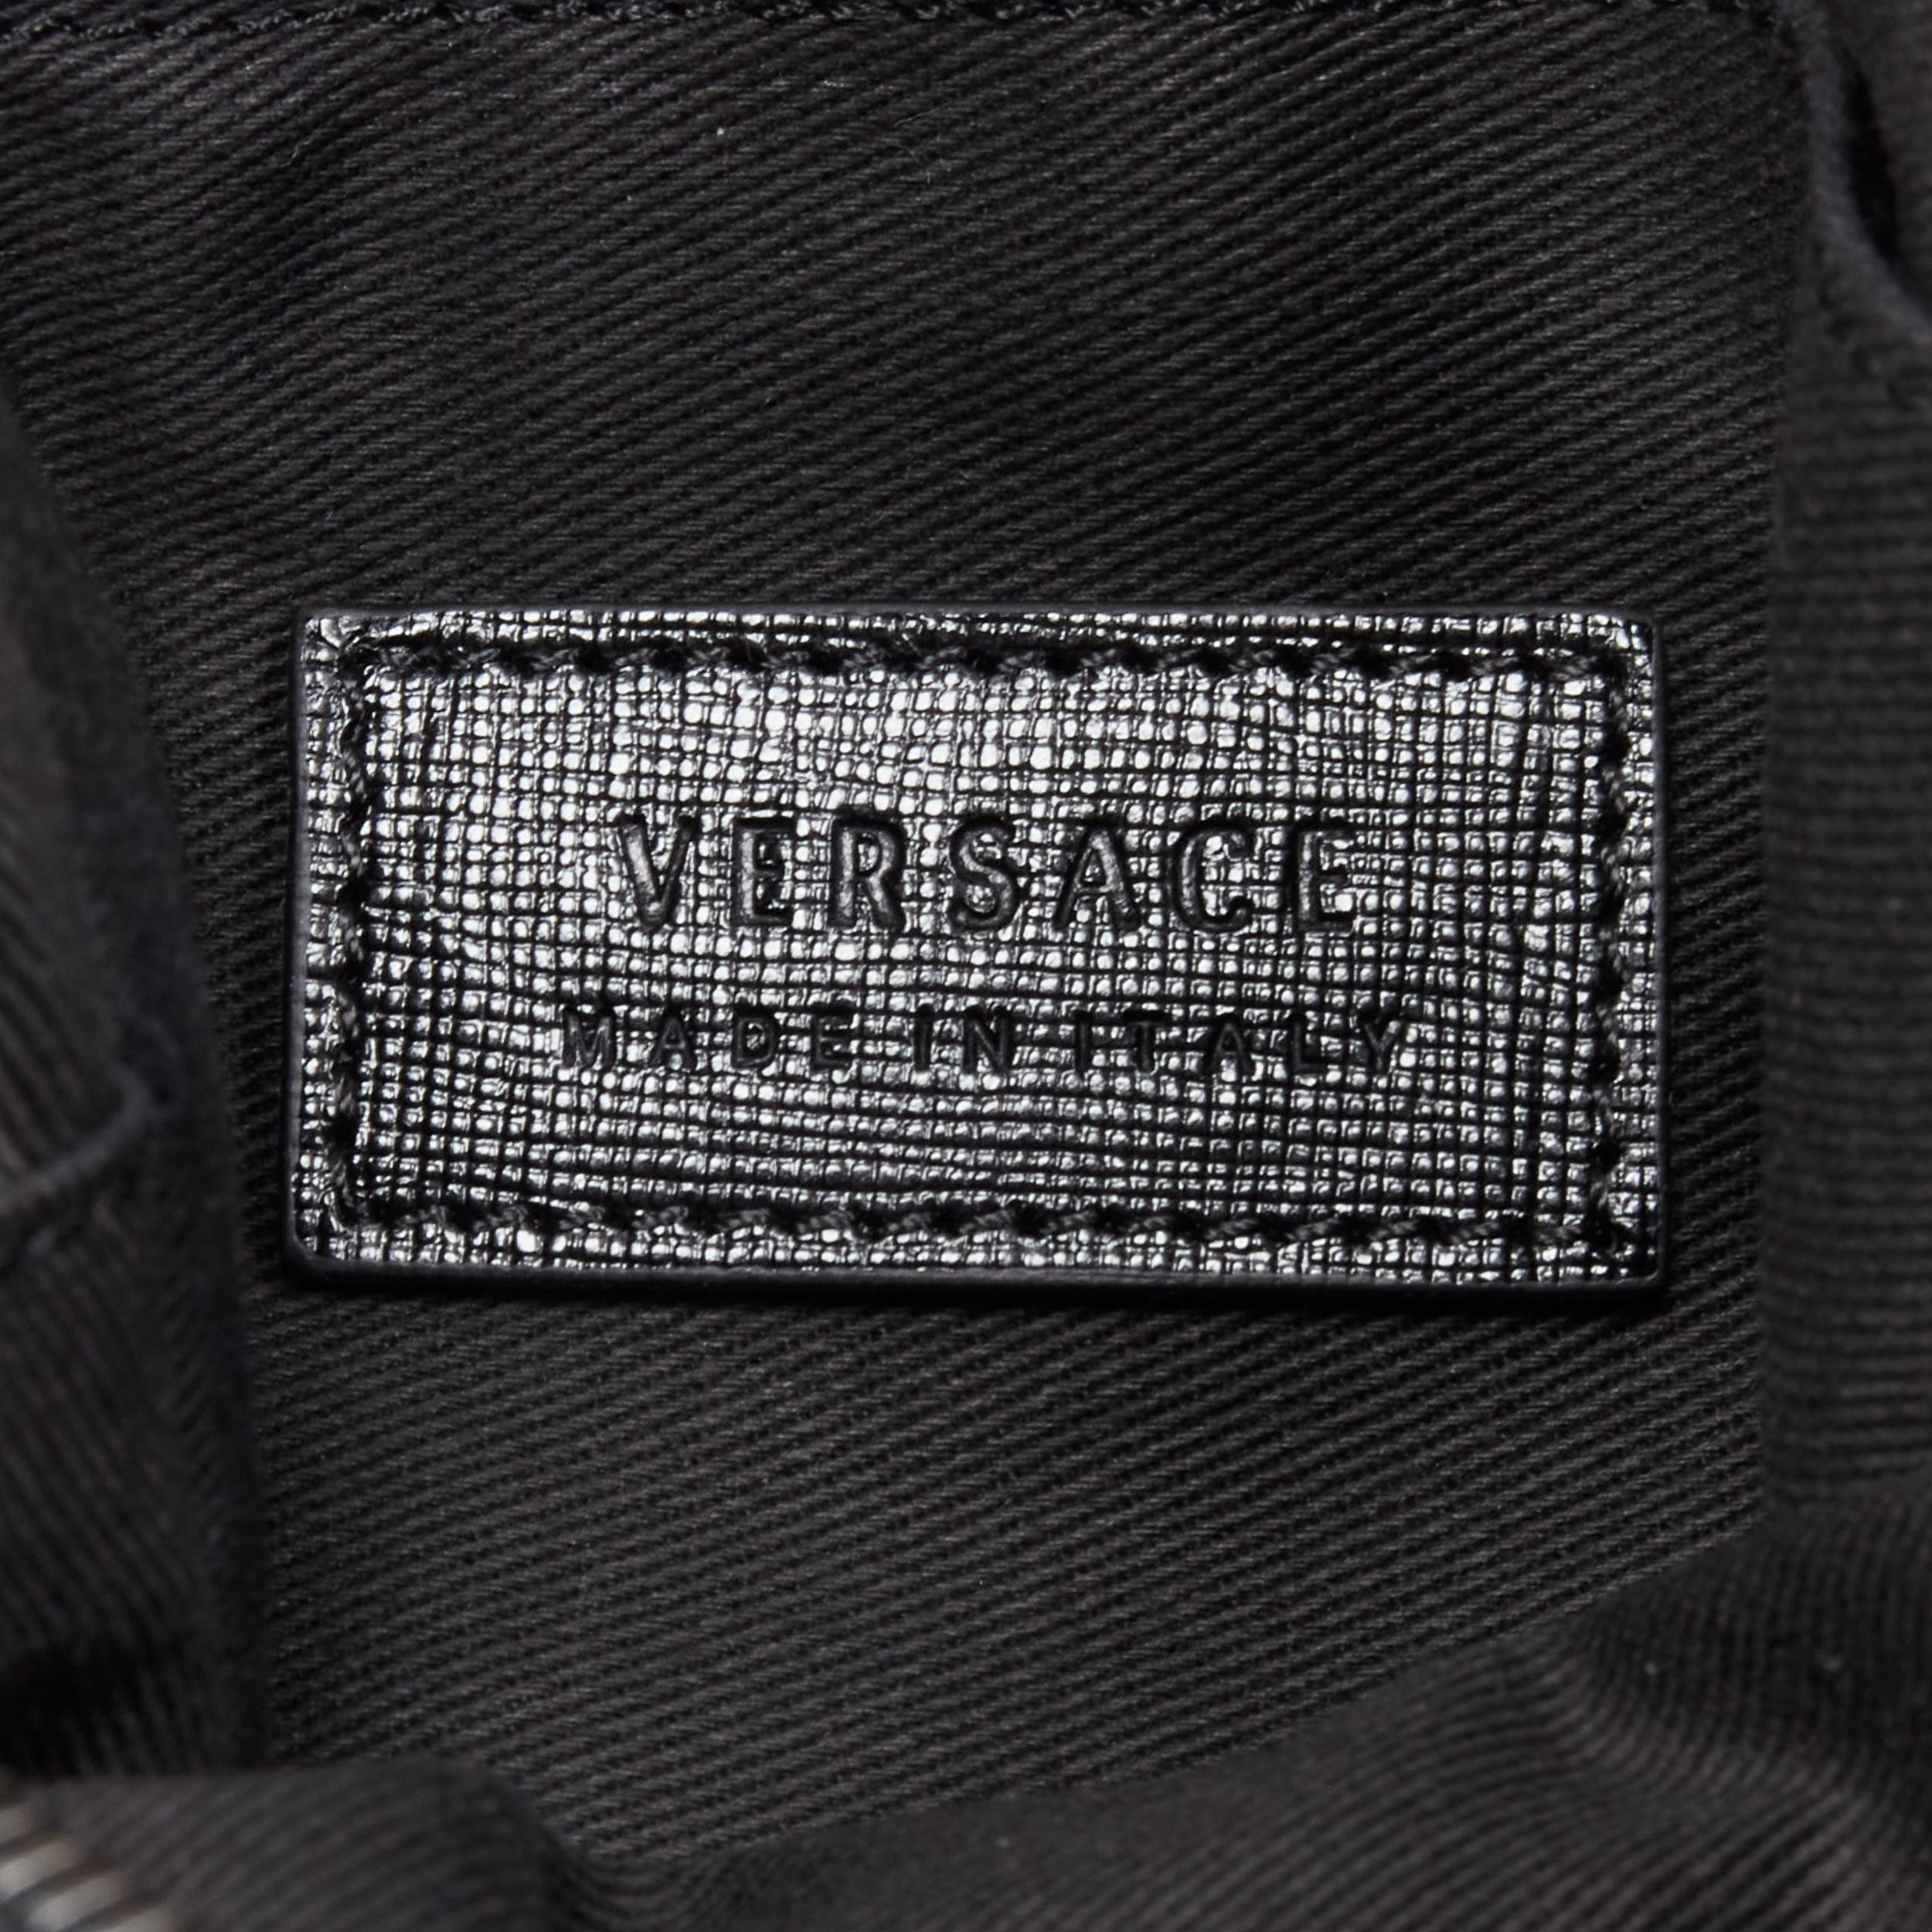 new VERSACE black lacquered saffiano leather silver Medusa messenger bag 5